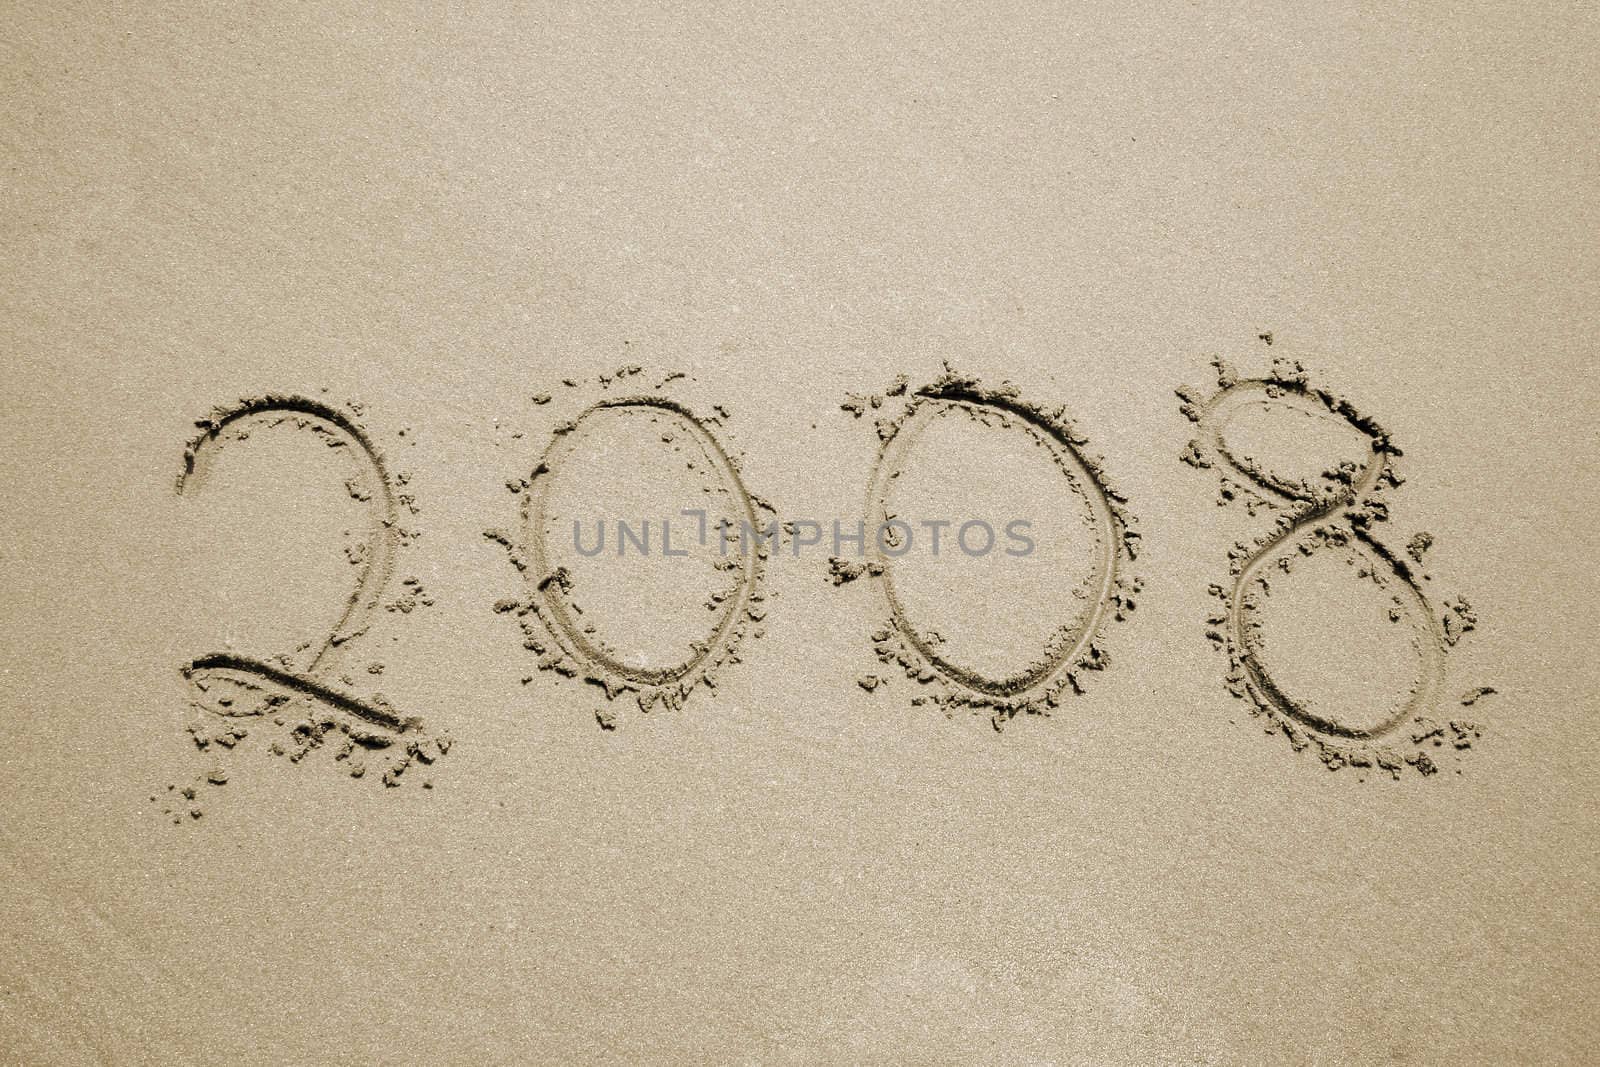 2008 in sand by Brightdawn